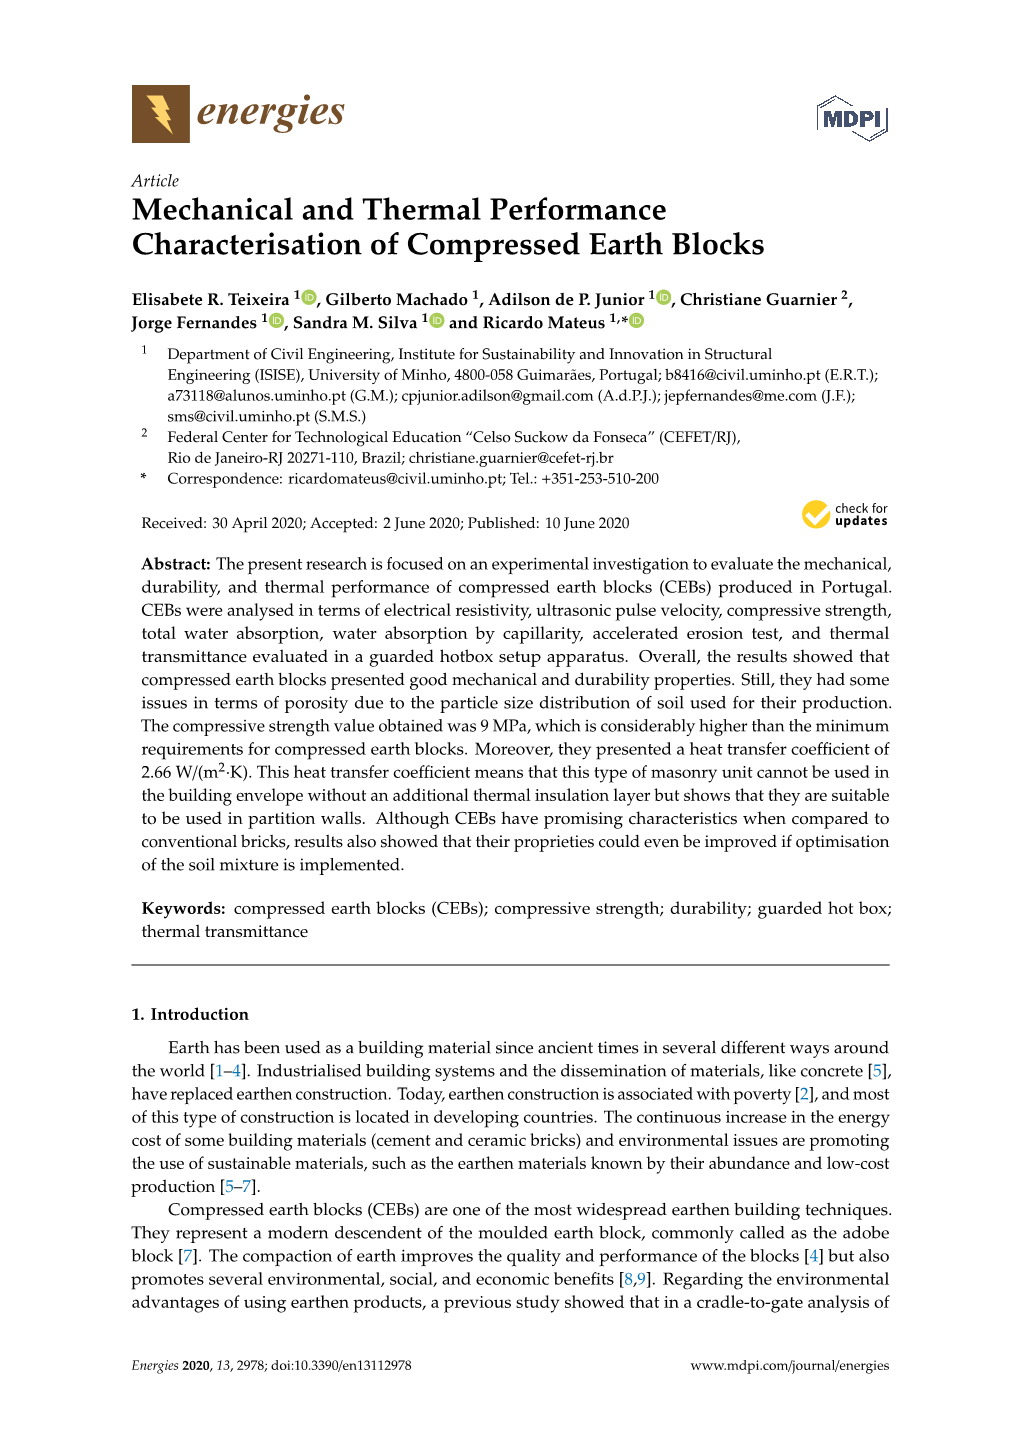 Mechanical and Thermal Performance Characterisation of Compressed Earth Blocks